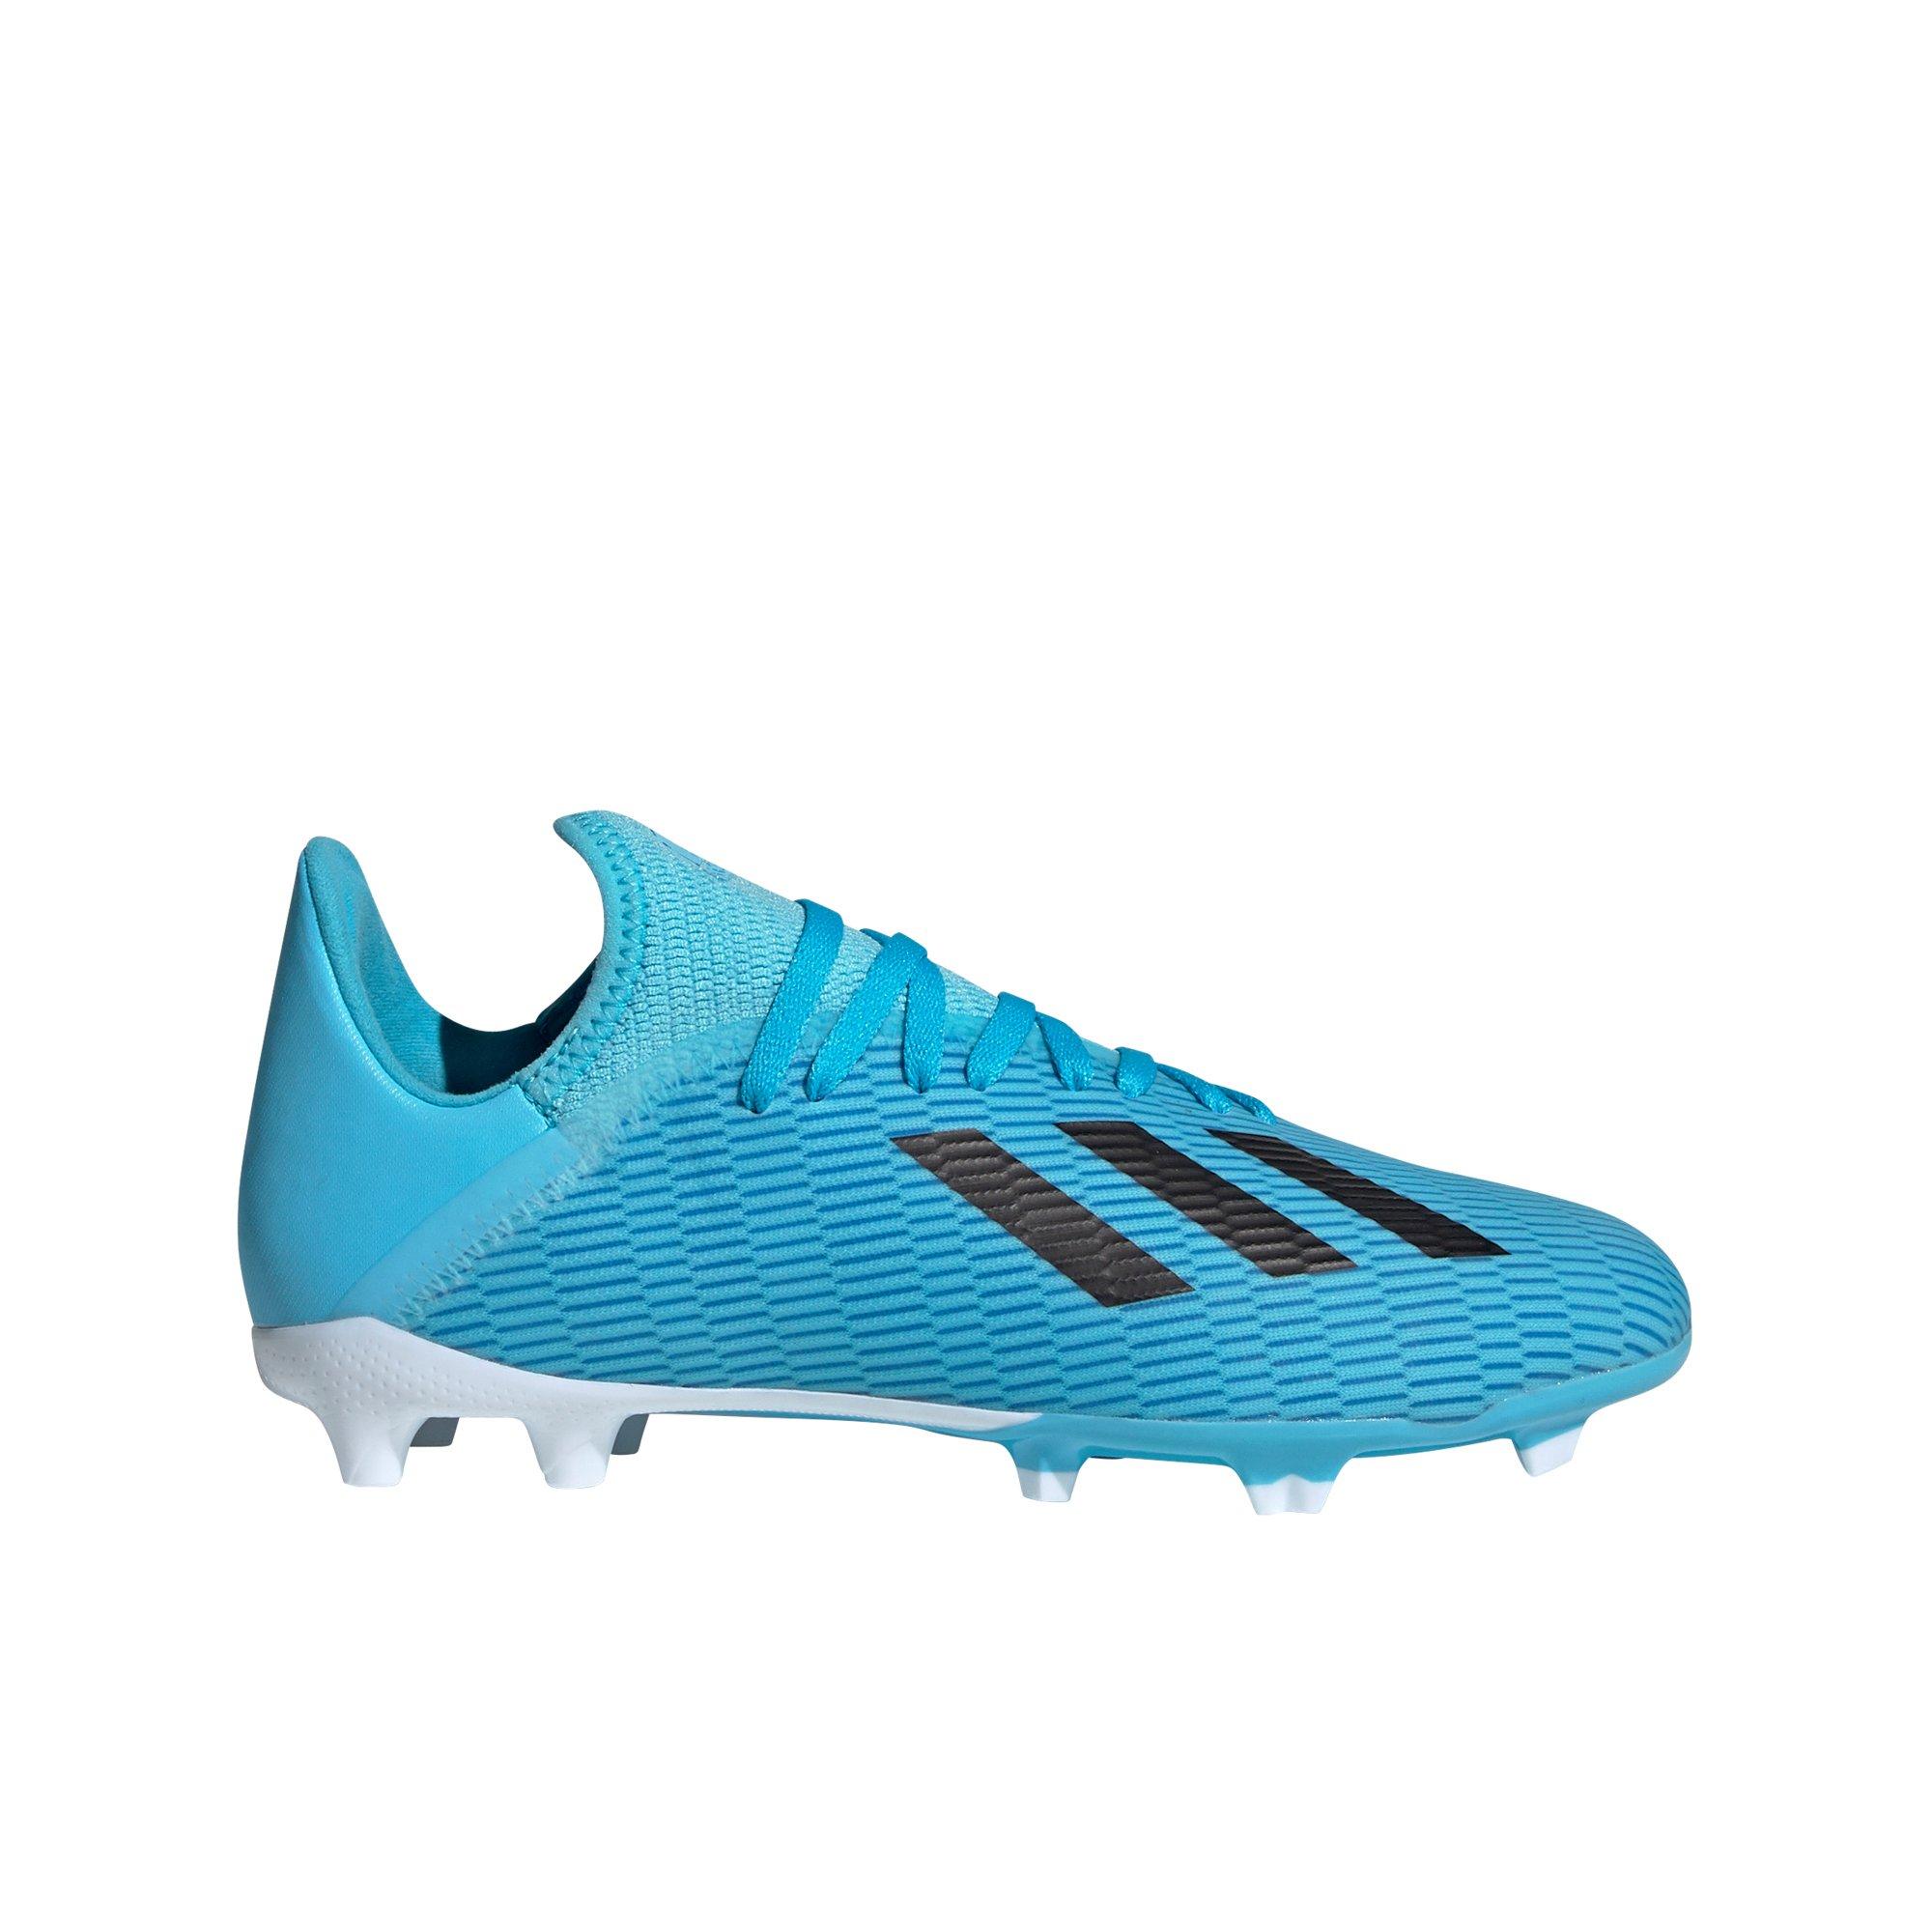 adidas girls soccer shoes